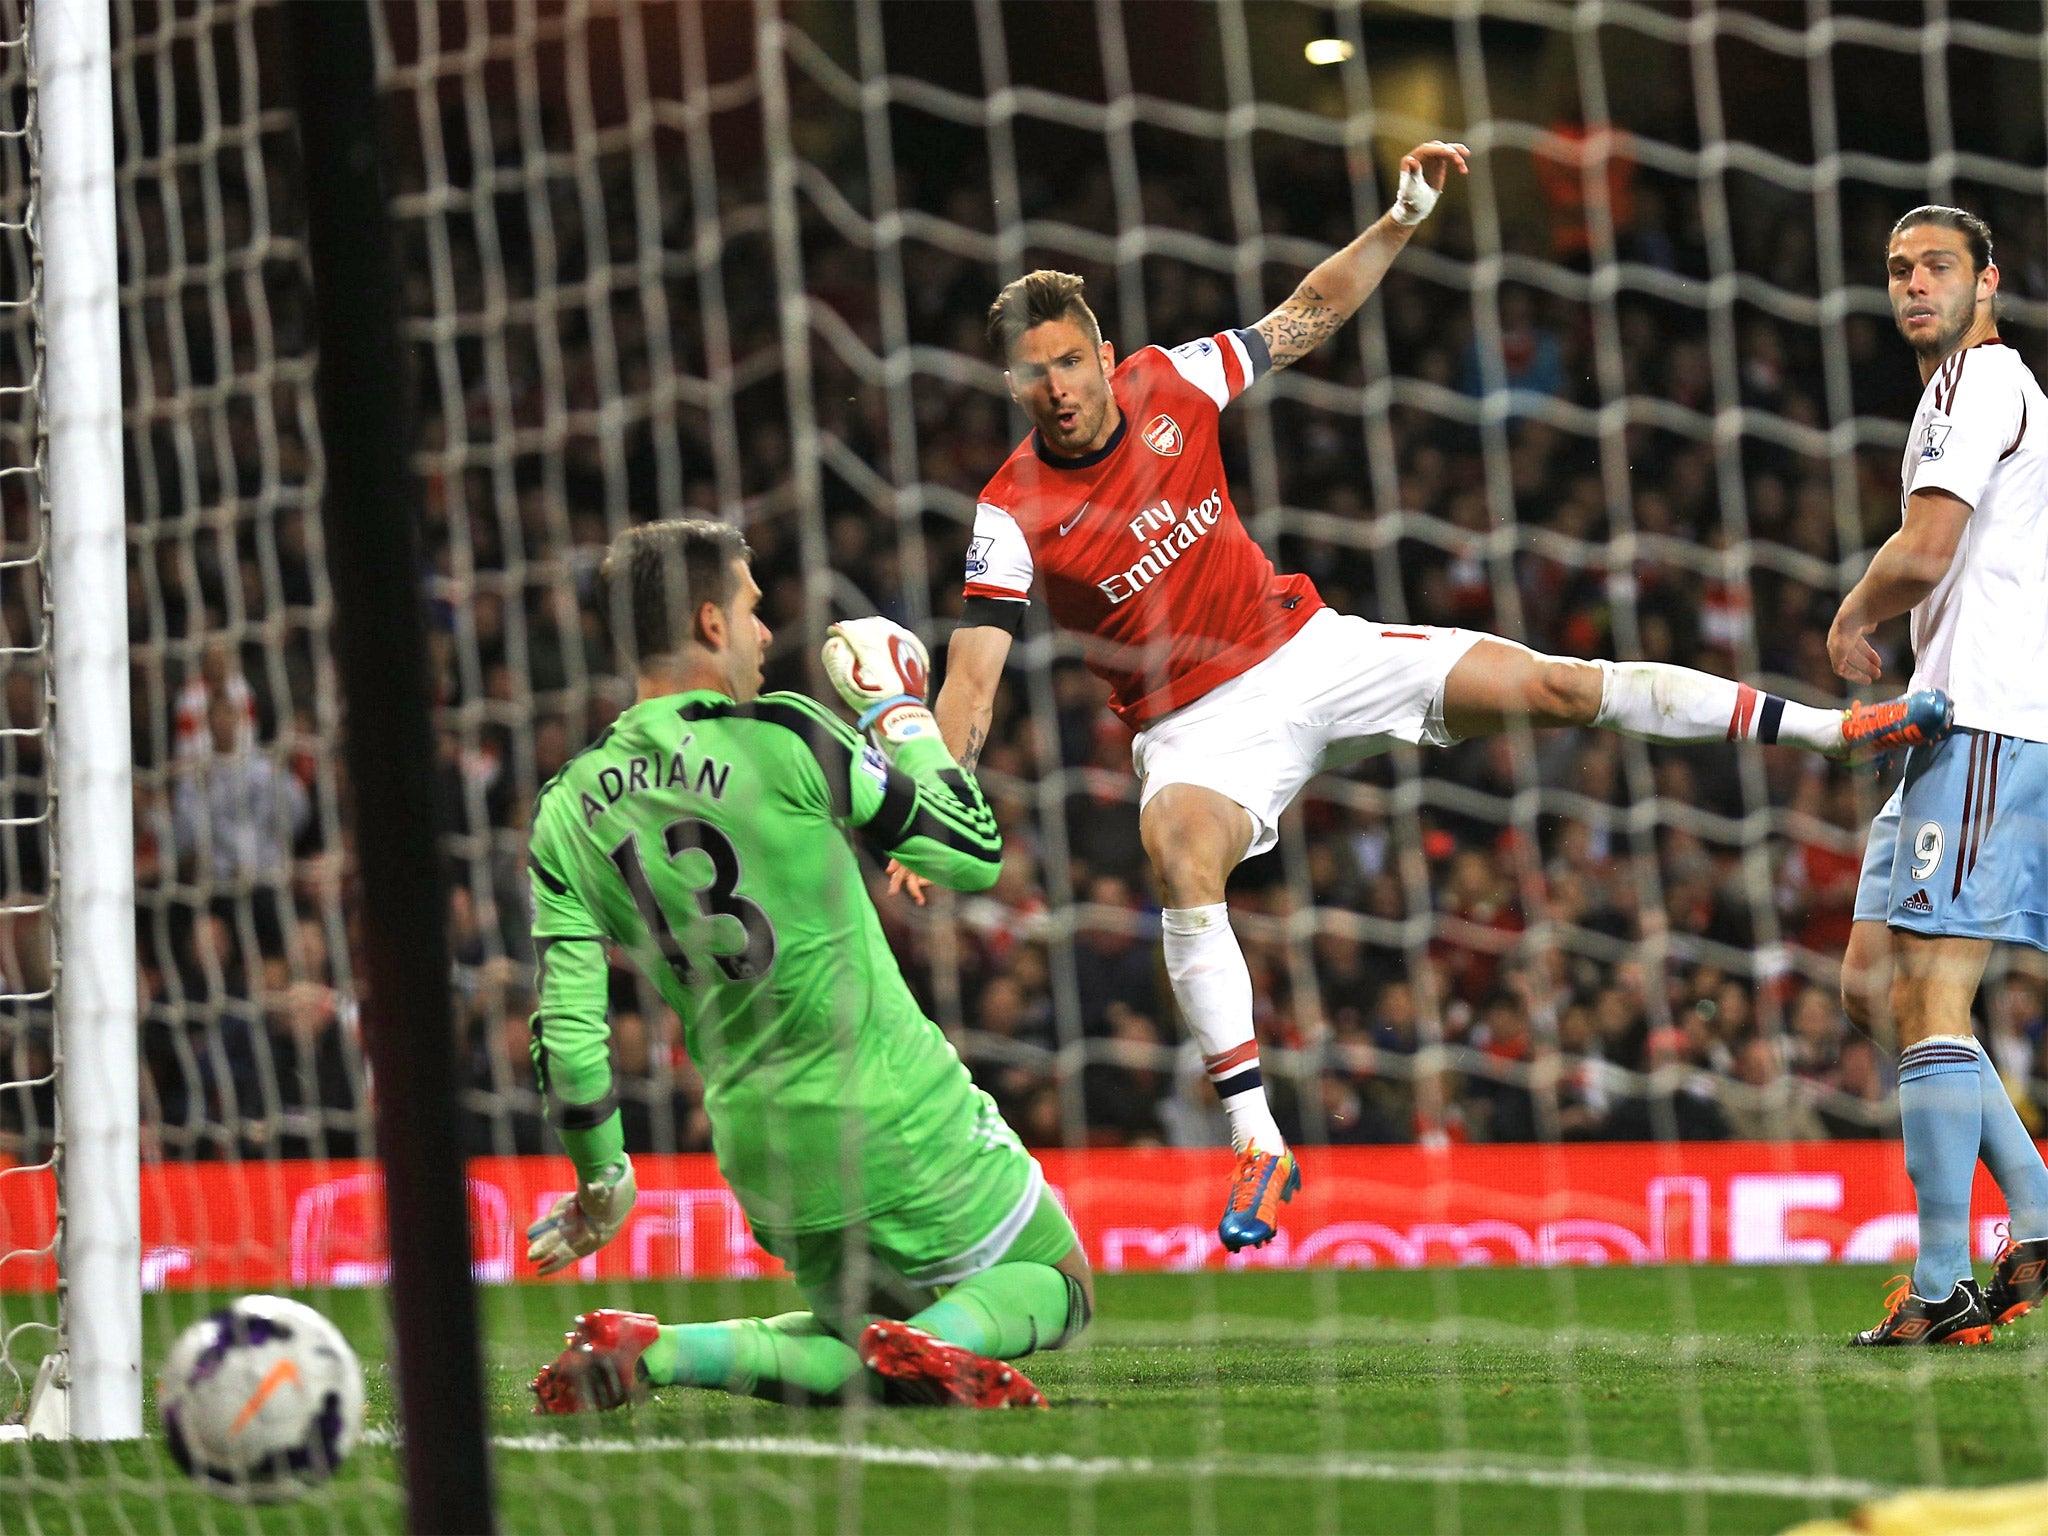 Oliver Giroud puts Arsenal ahead with his weaker right foot after showing sublime touch to get the ball under control